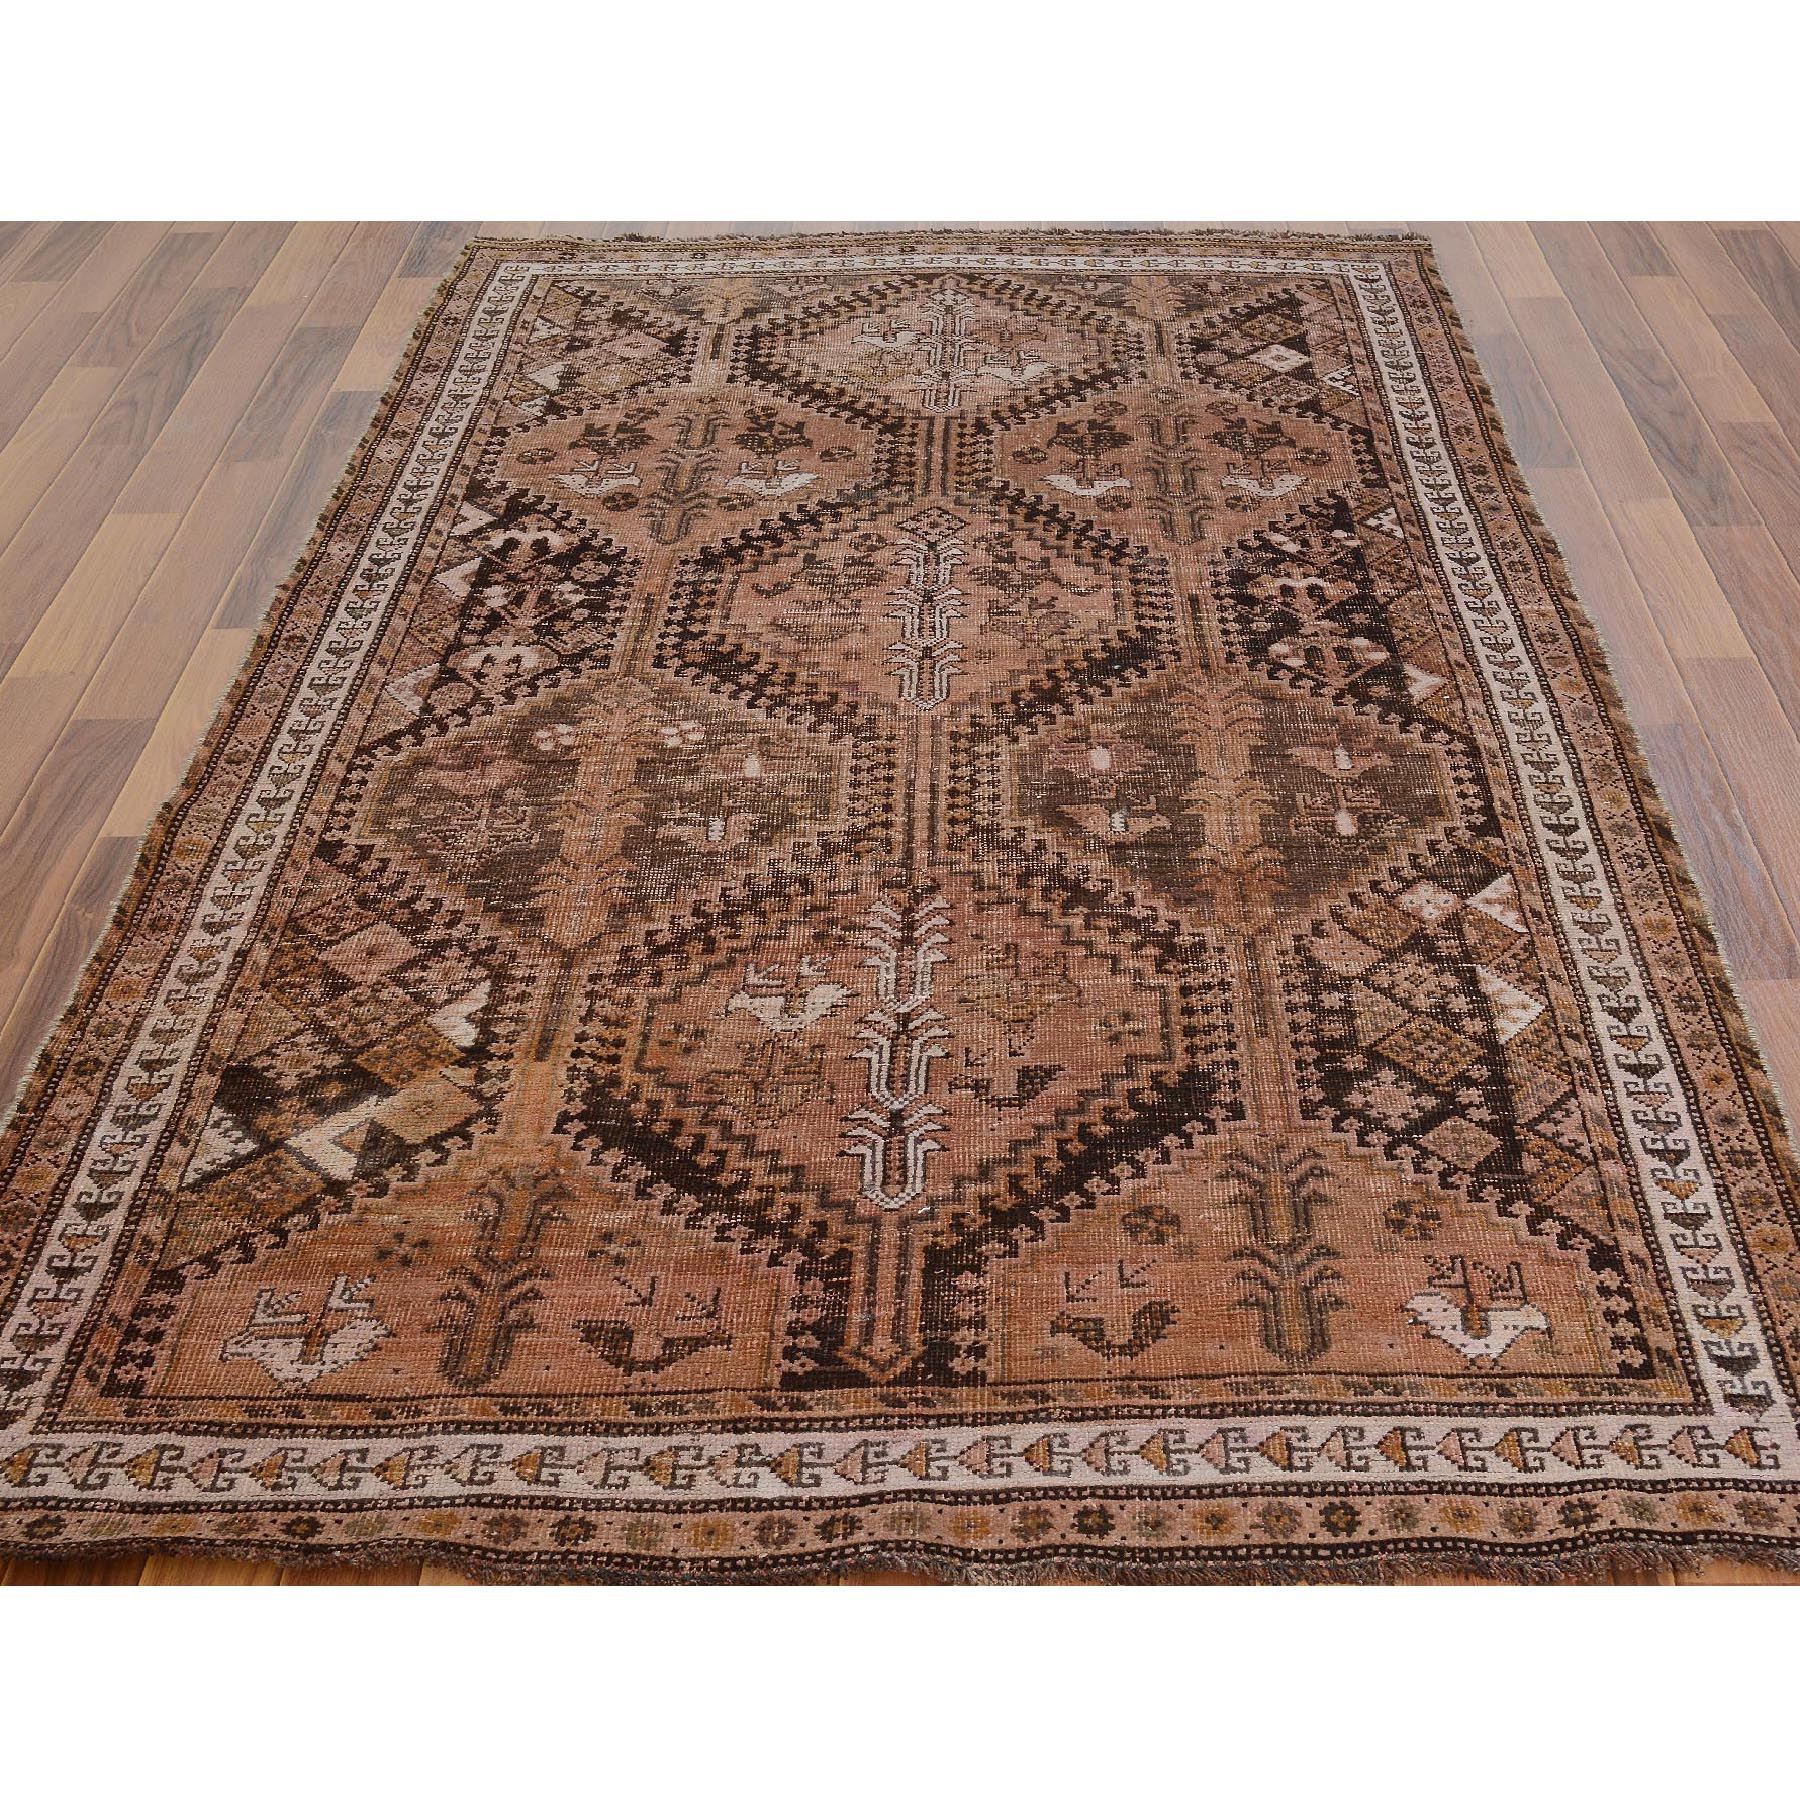 4-9 x8-6  Brown Vintage And Worn Down Persian Qashqai Pure Wool Hand Knotted Oriental Rug 